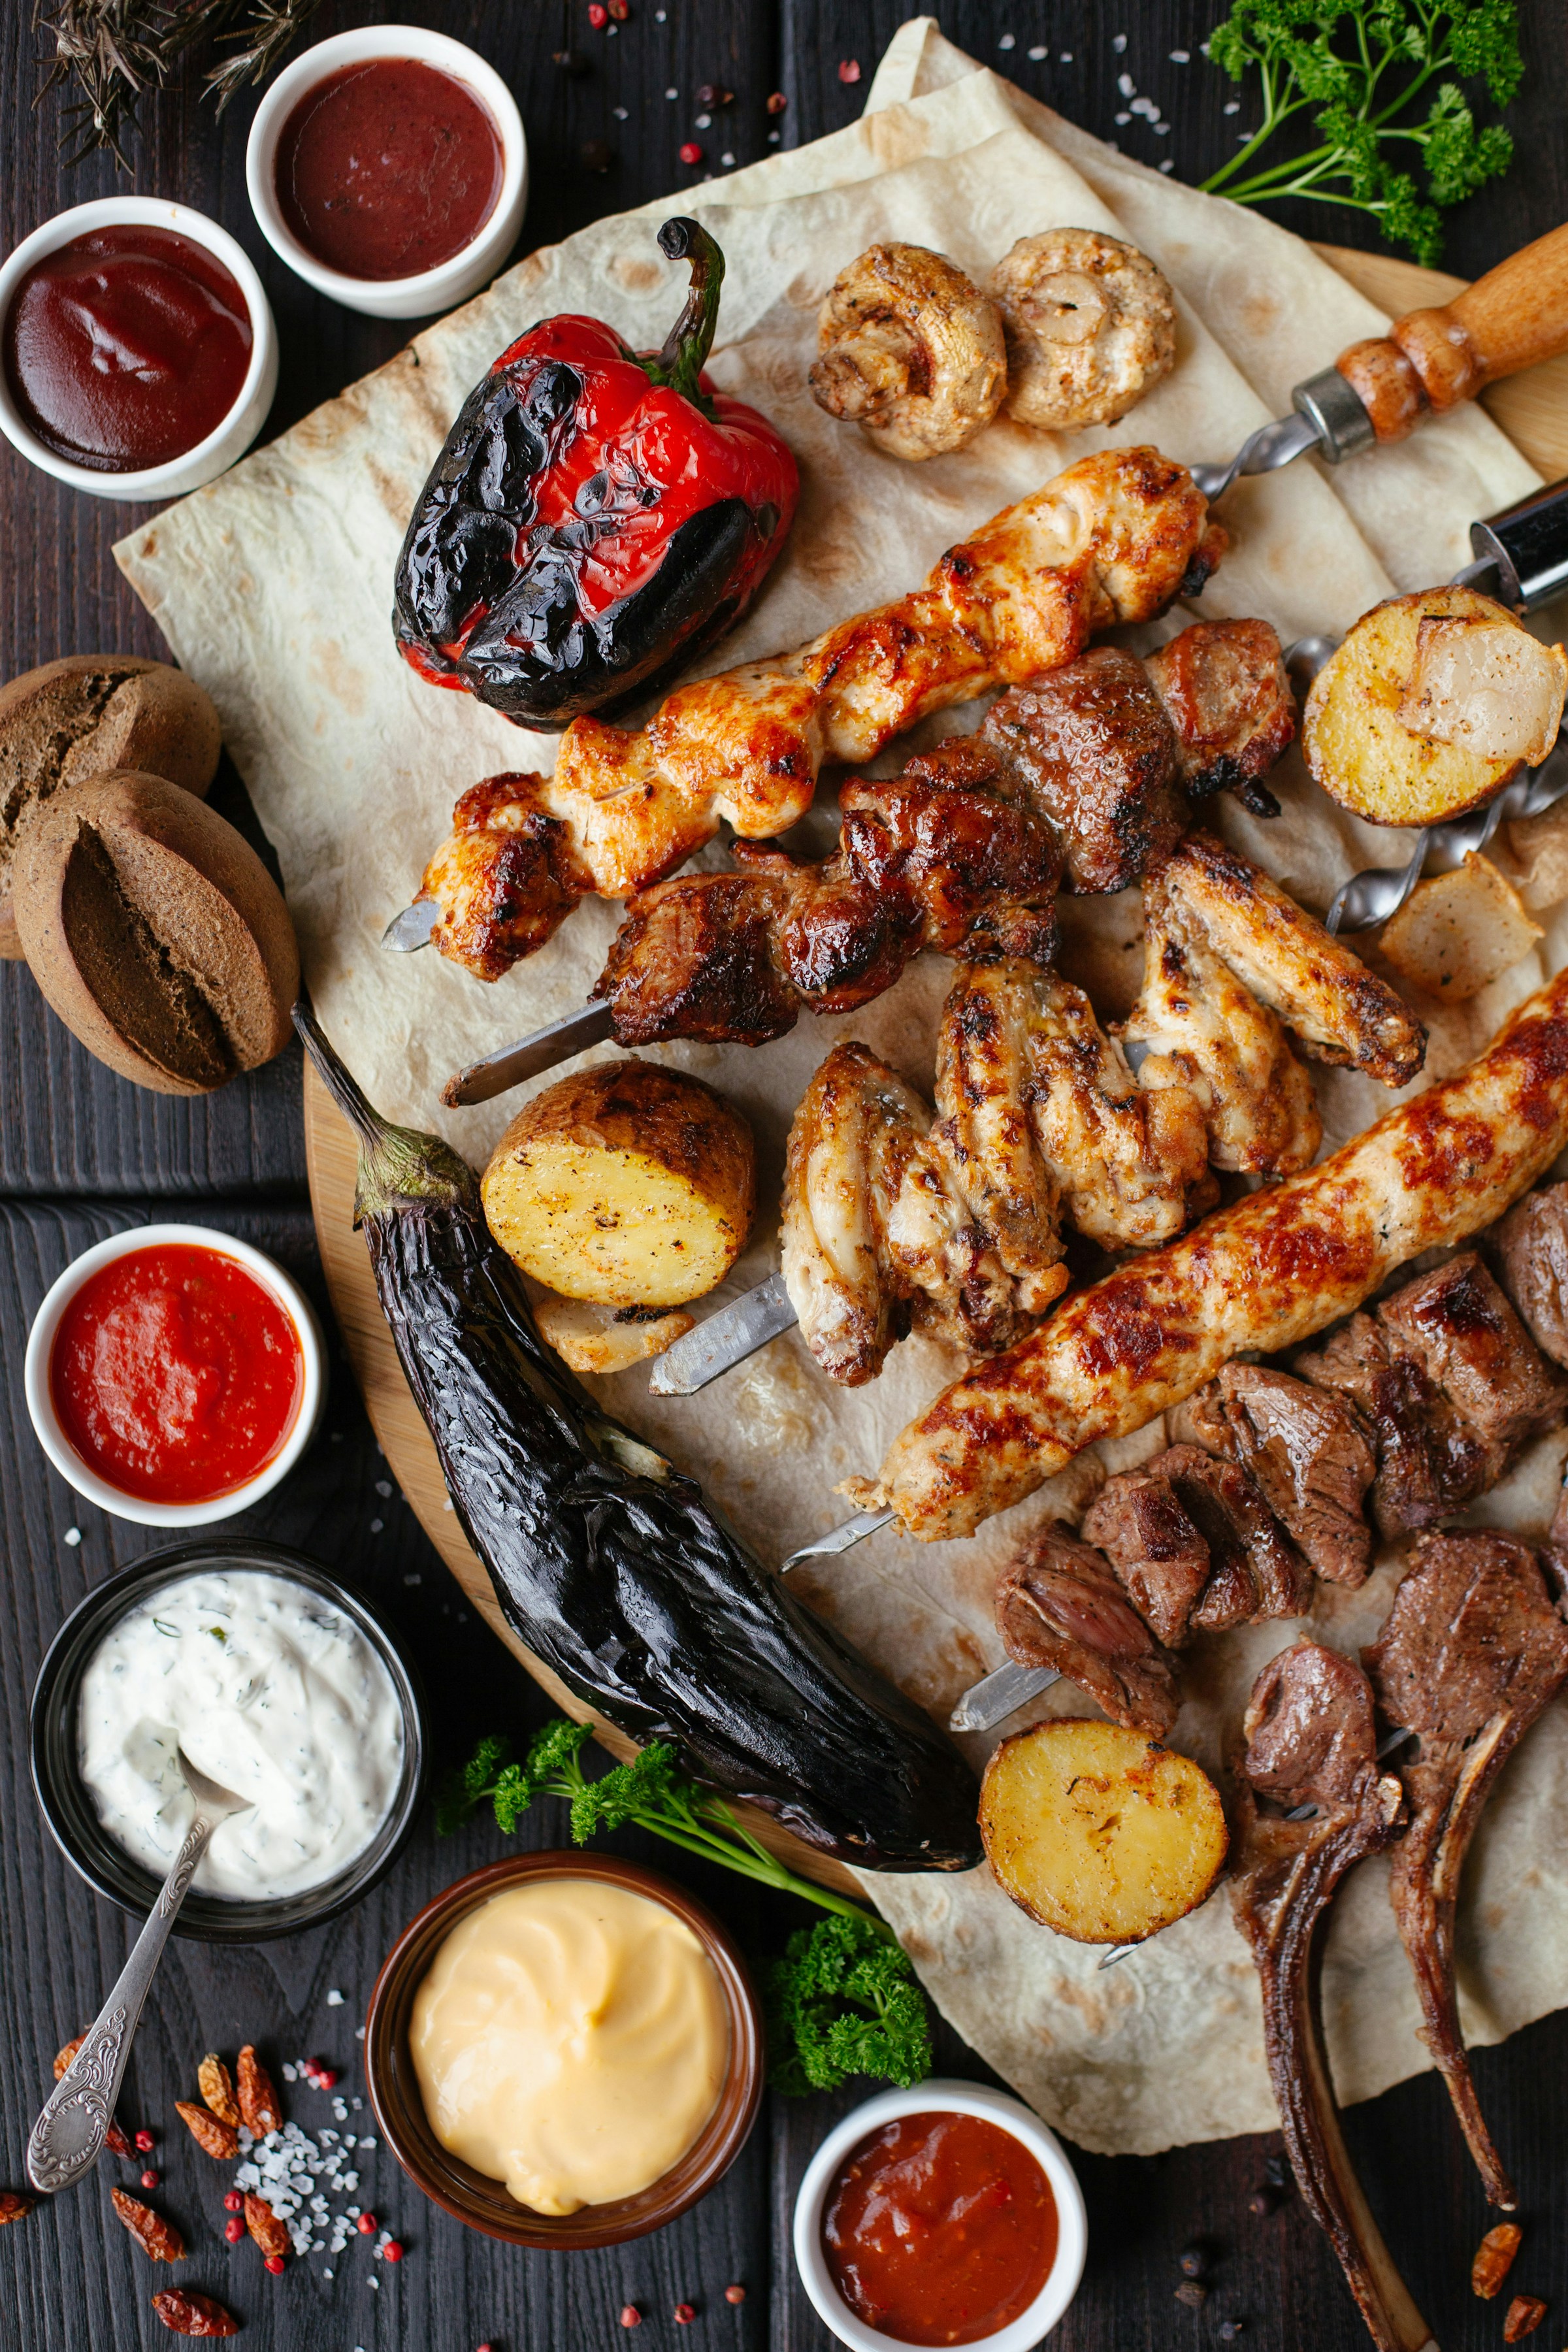 Cooked meat and veggies on a table | Source: Unsplash